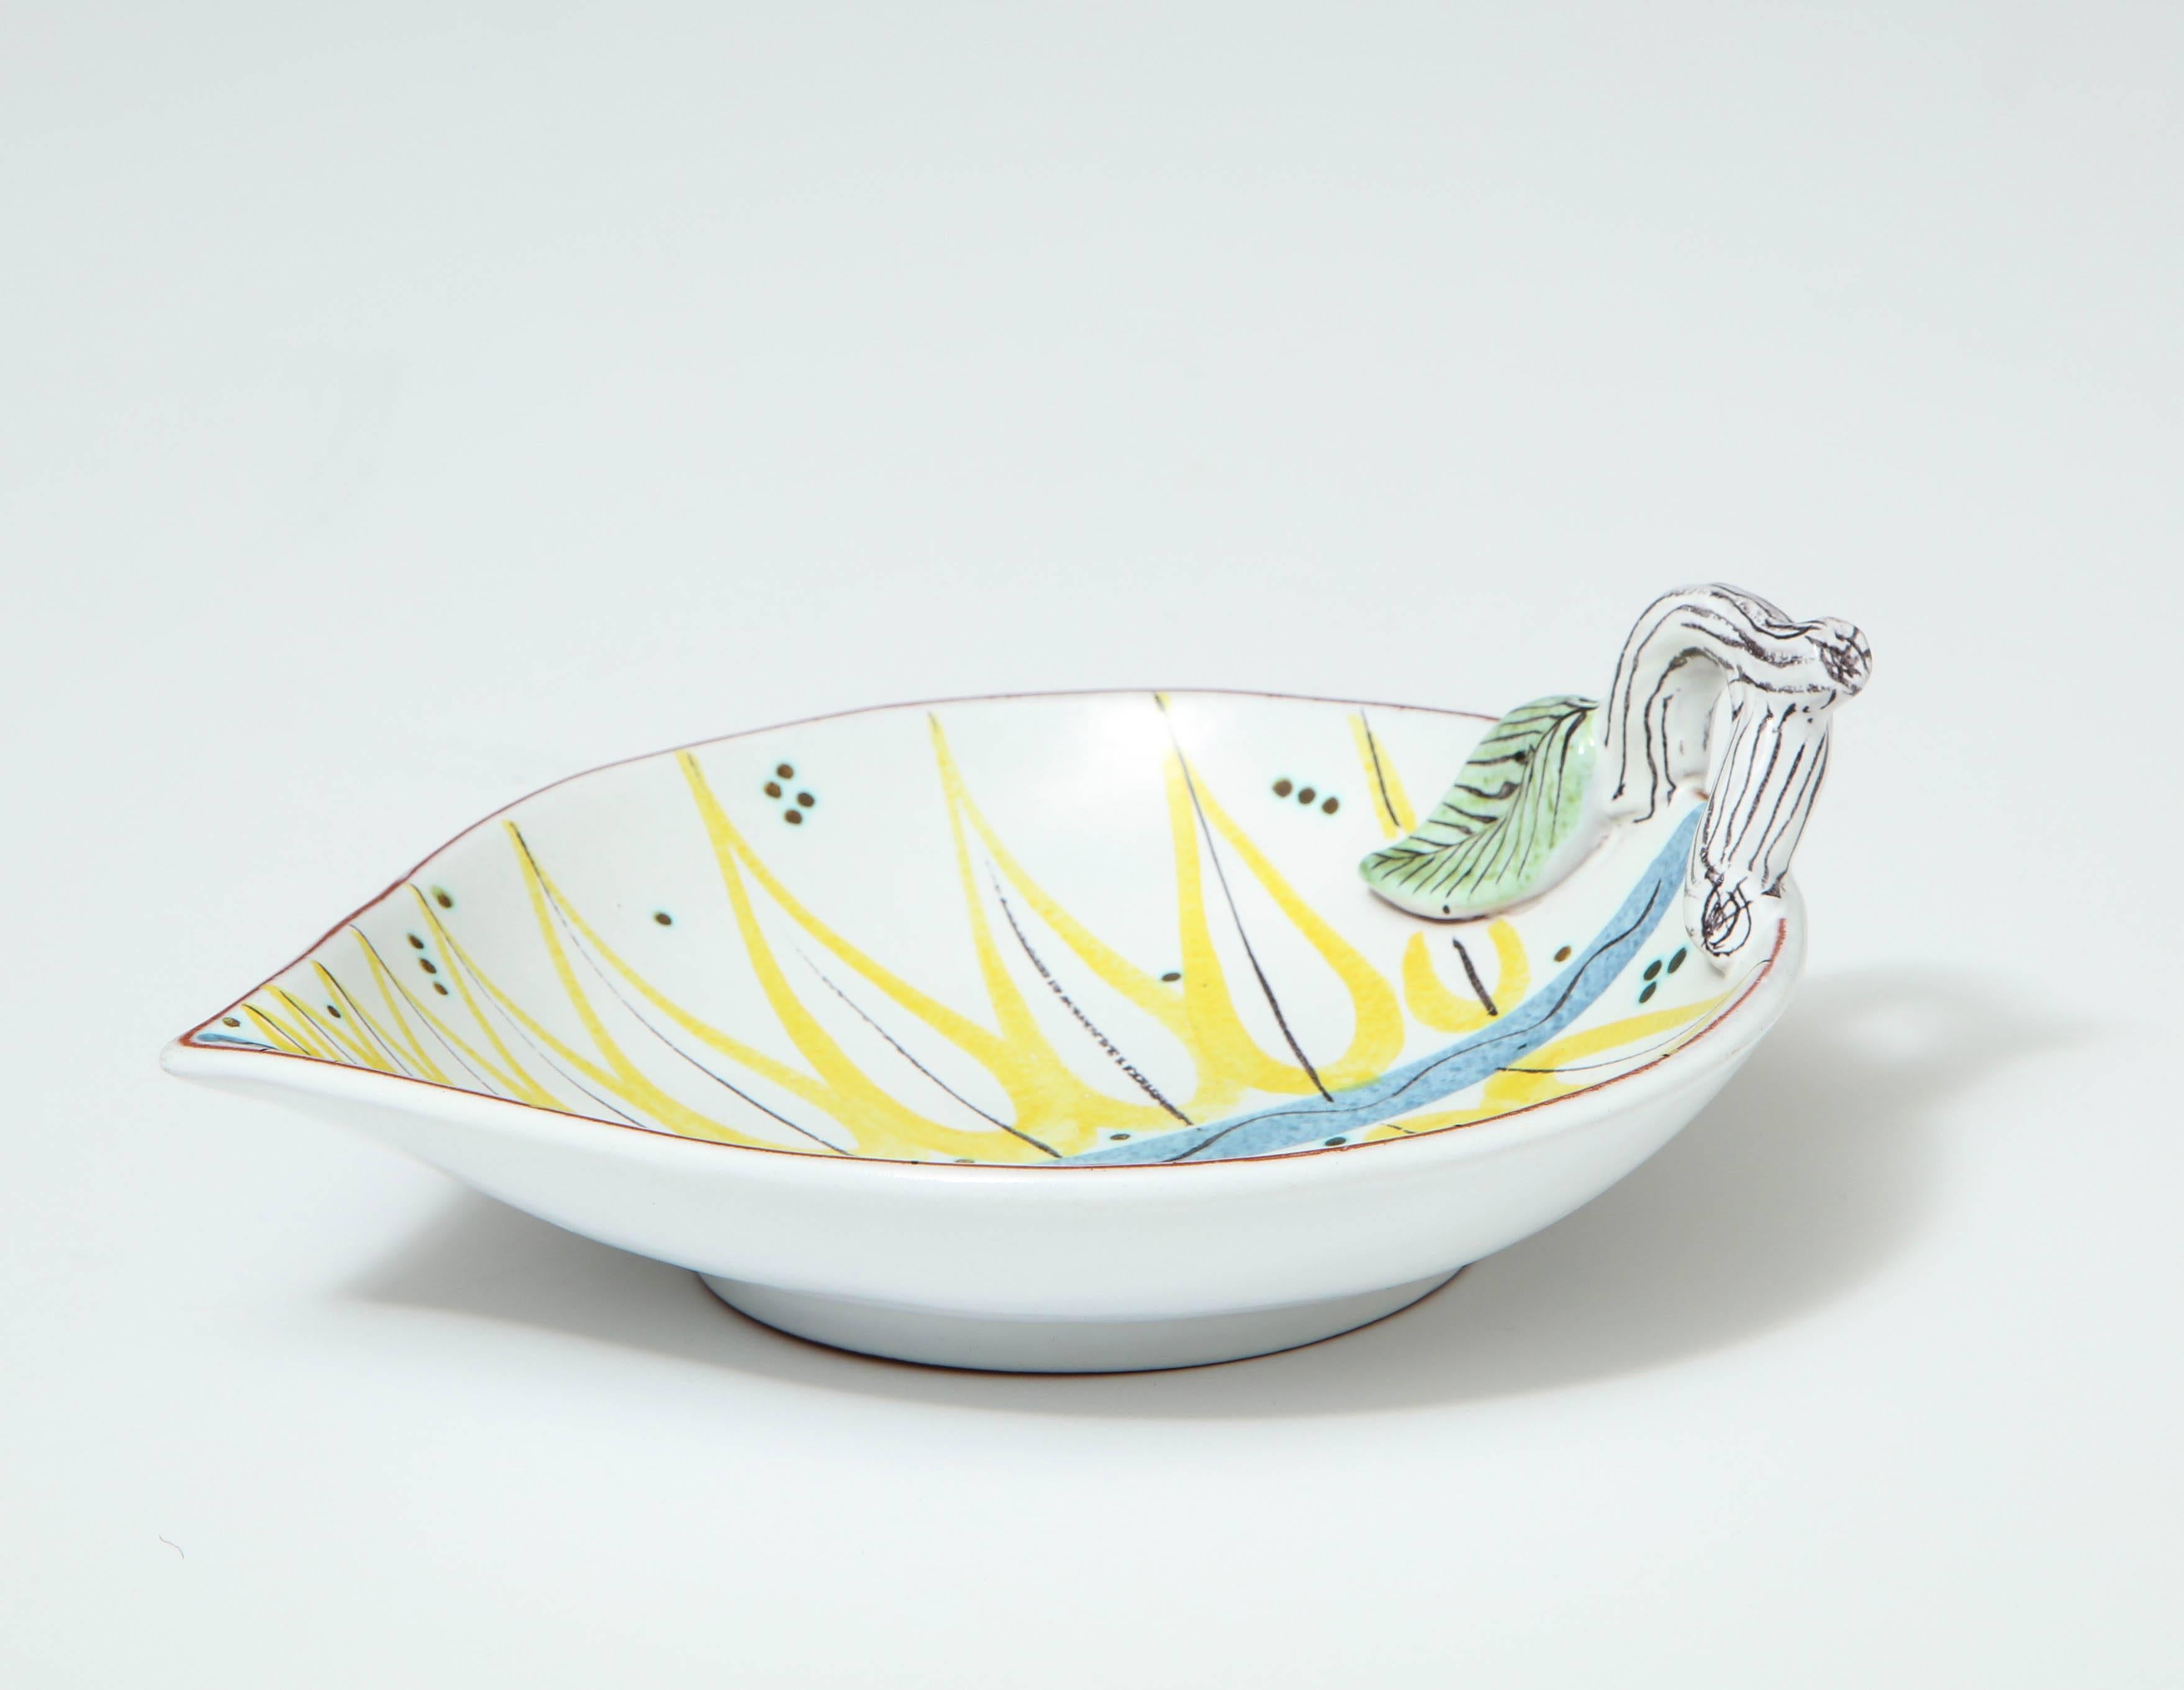 Faience Pottery Bowl by Stig Lindberg, Sweden, circa 1950, White, Yellow and Blue